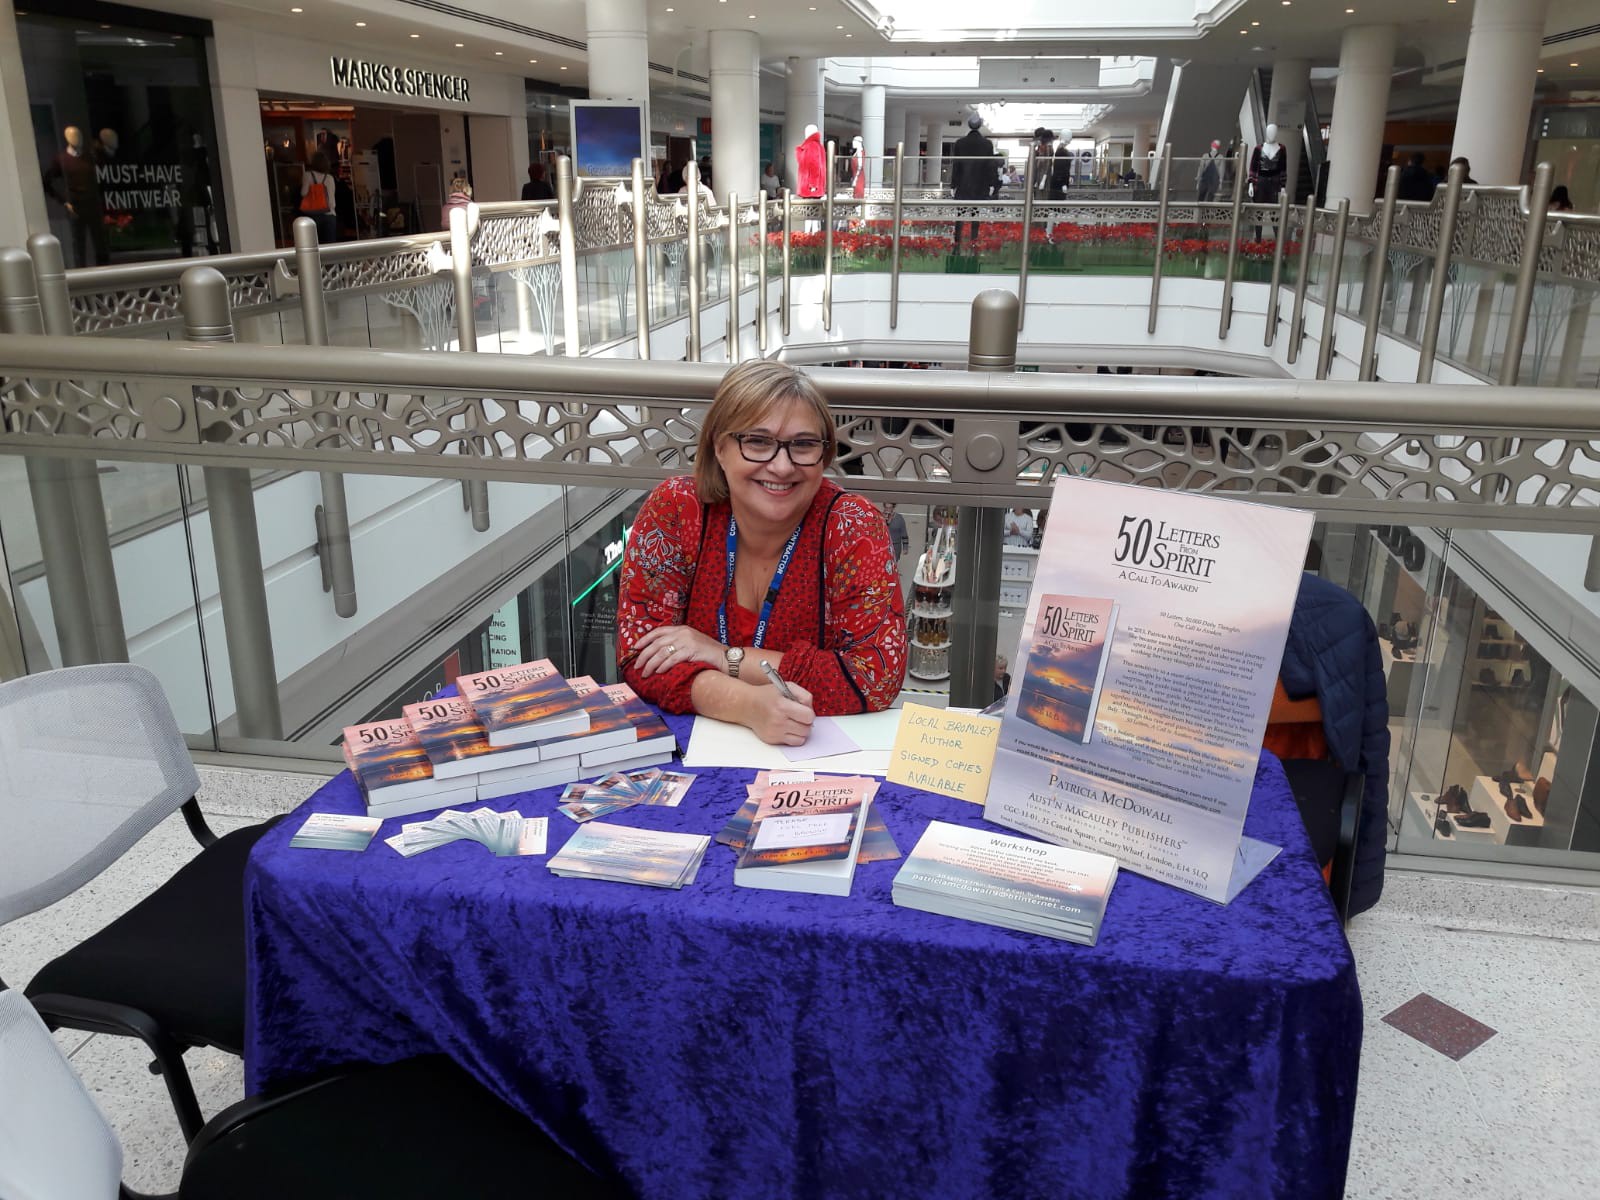 Patricia McDowall 50 Letters from Spirit Attending “The Glades” At Bromley Shopping Centre